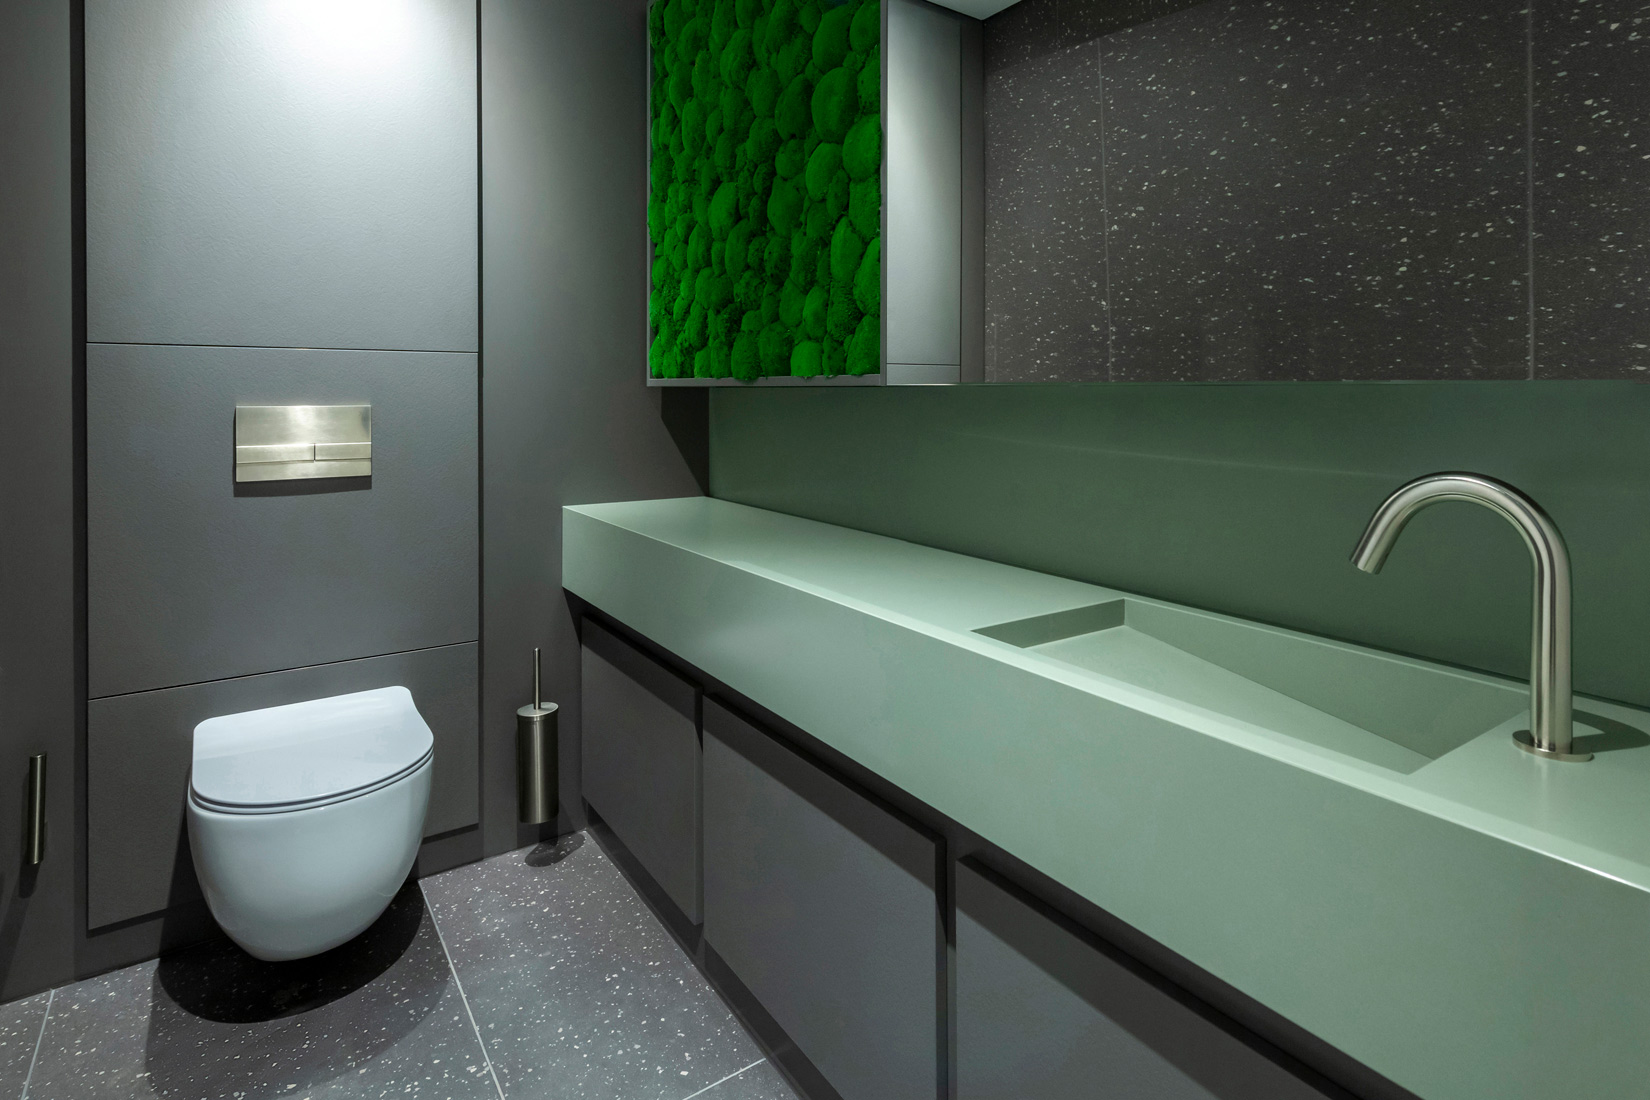 Image of superloos 5 in Sustainable washbasins in Mediterranean colours and modern design for the groundbreaking Superloo bathrooms - Cosentino